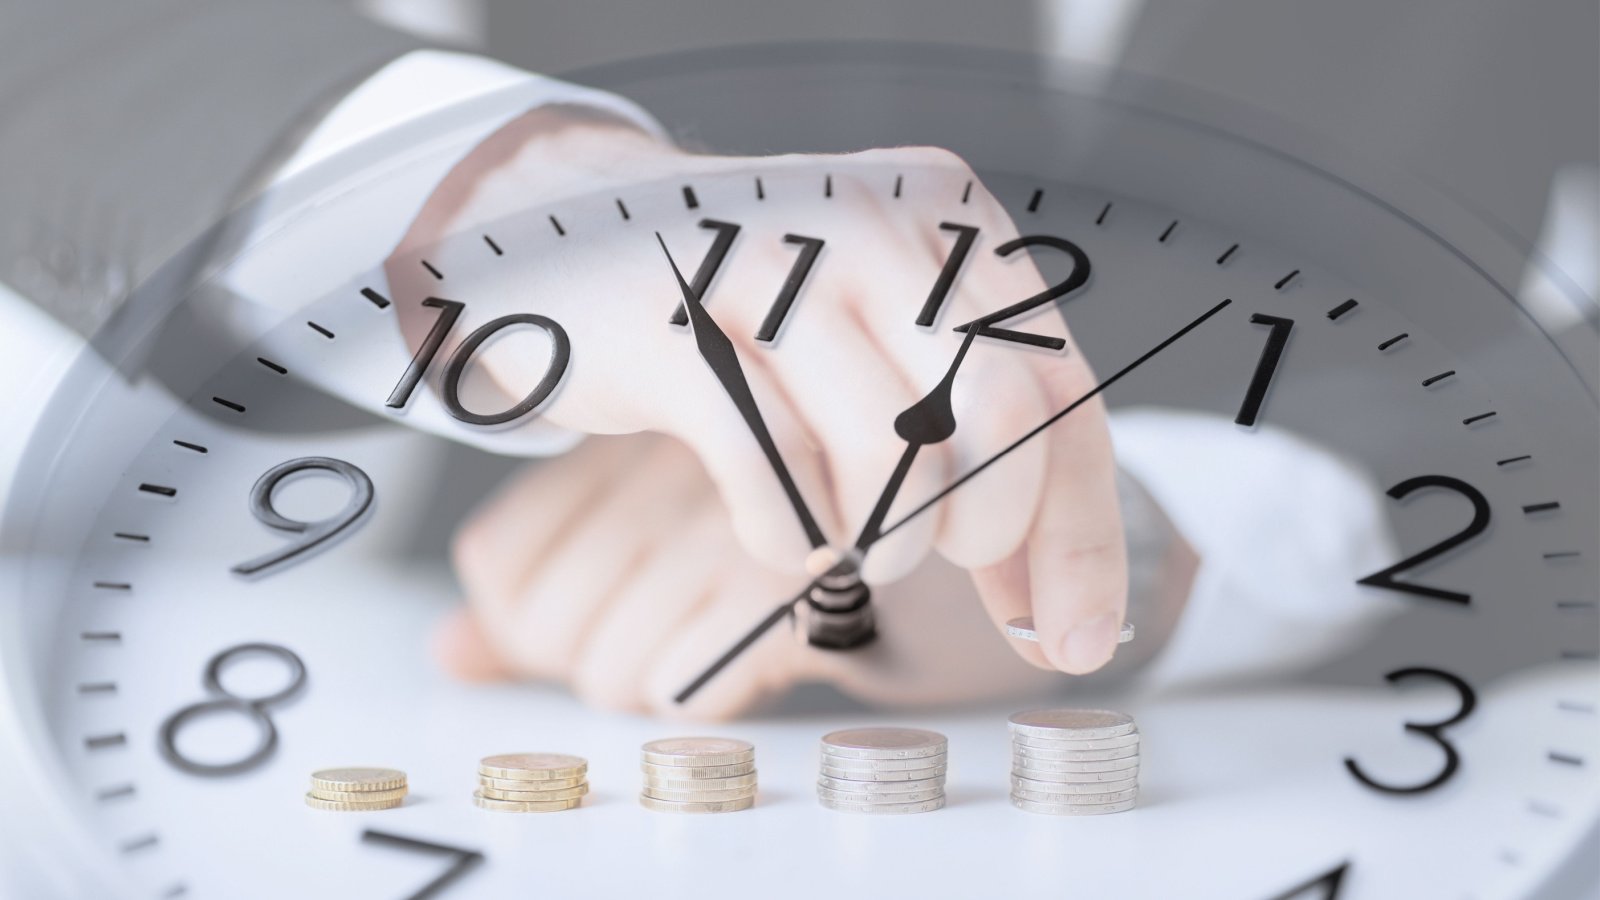 <p>Though they have plenty of the latter, the super-rich often value time more. They understand that time is a non-renewable resource and structure their lives to maximize productivity and meaningful engagements.  </p>